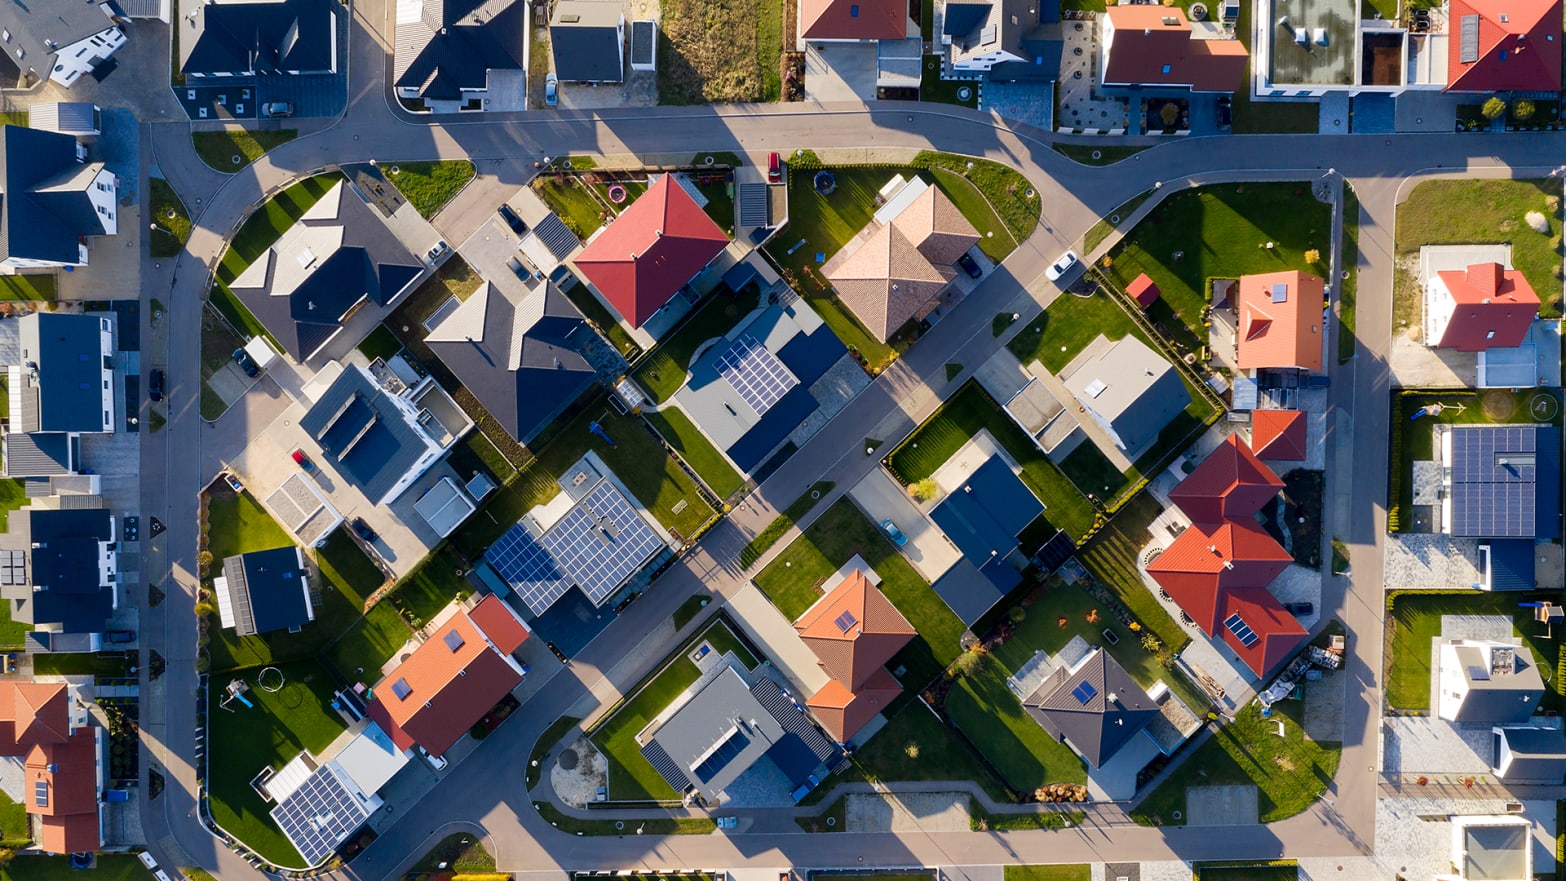 An aerial view of a neighborhood – the organized houses and roads make patterns in the landscape.